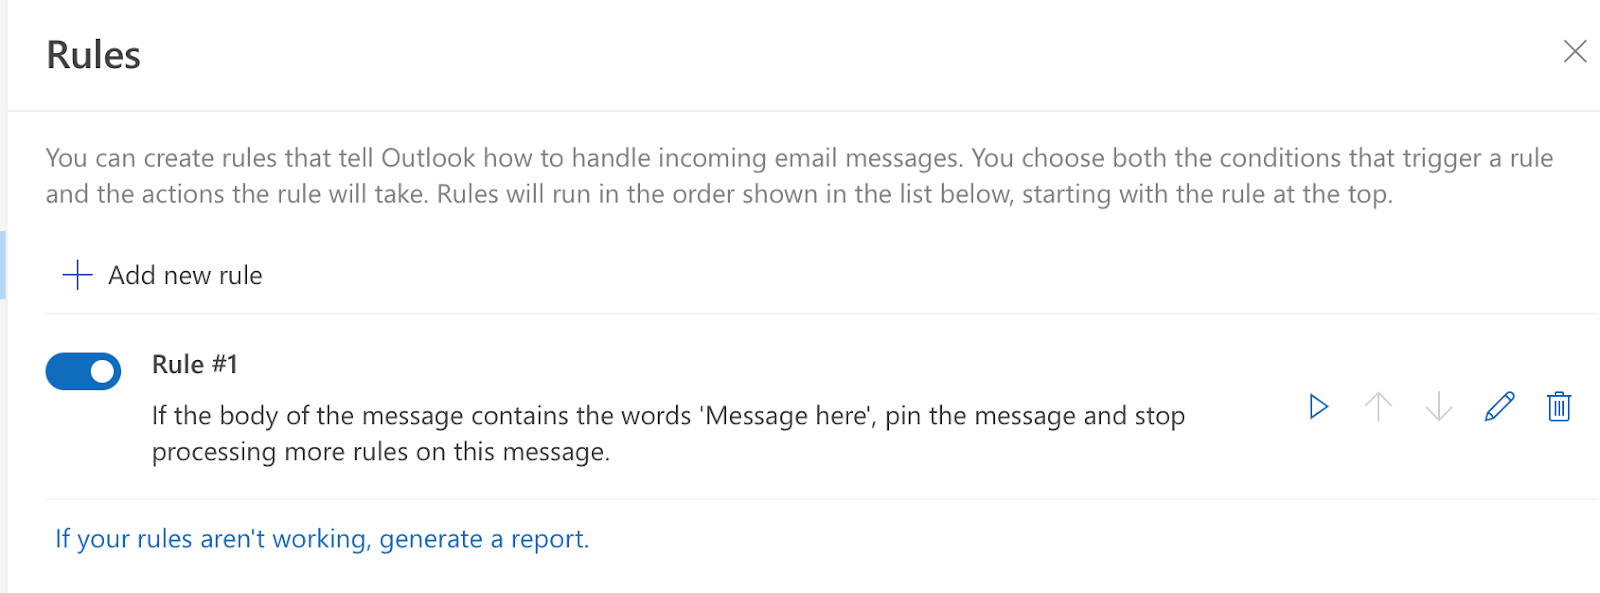 Outlook rules not working